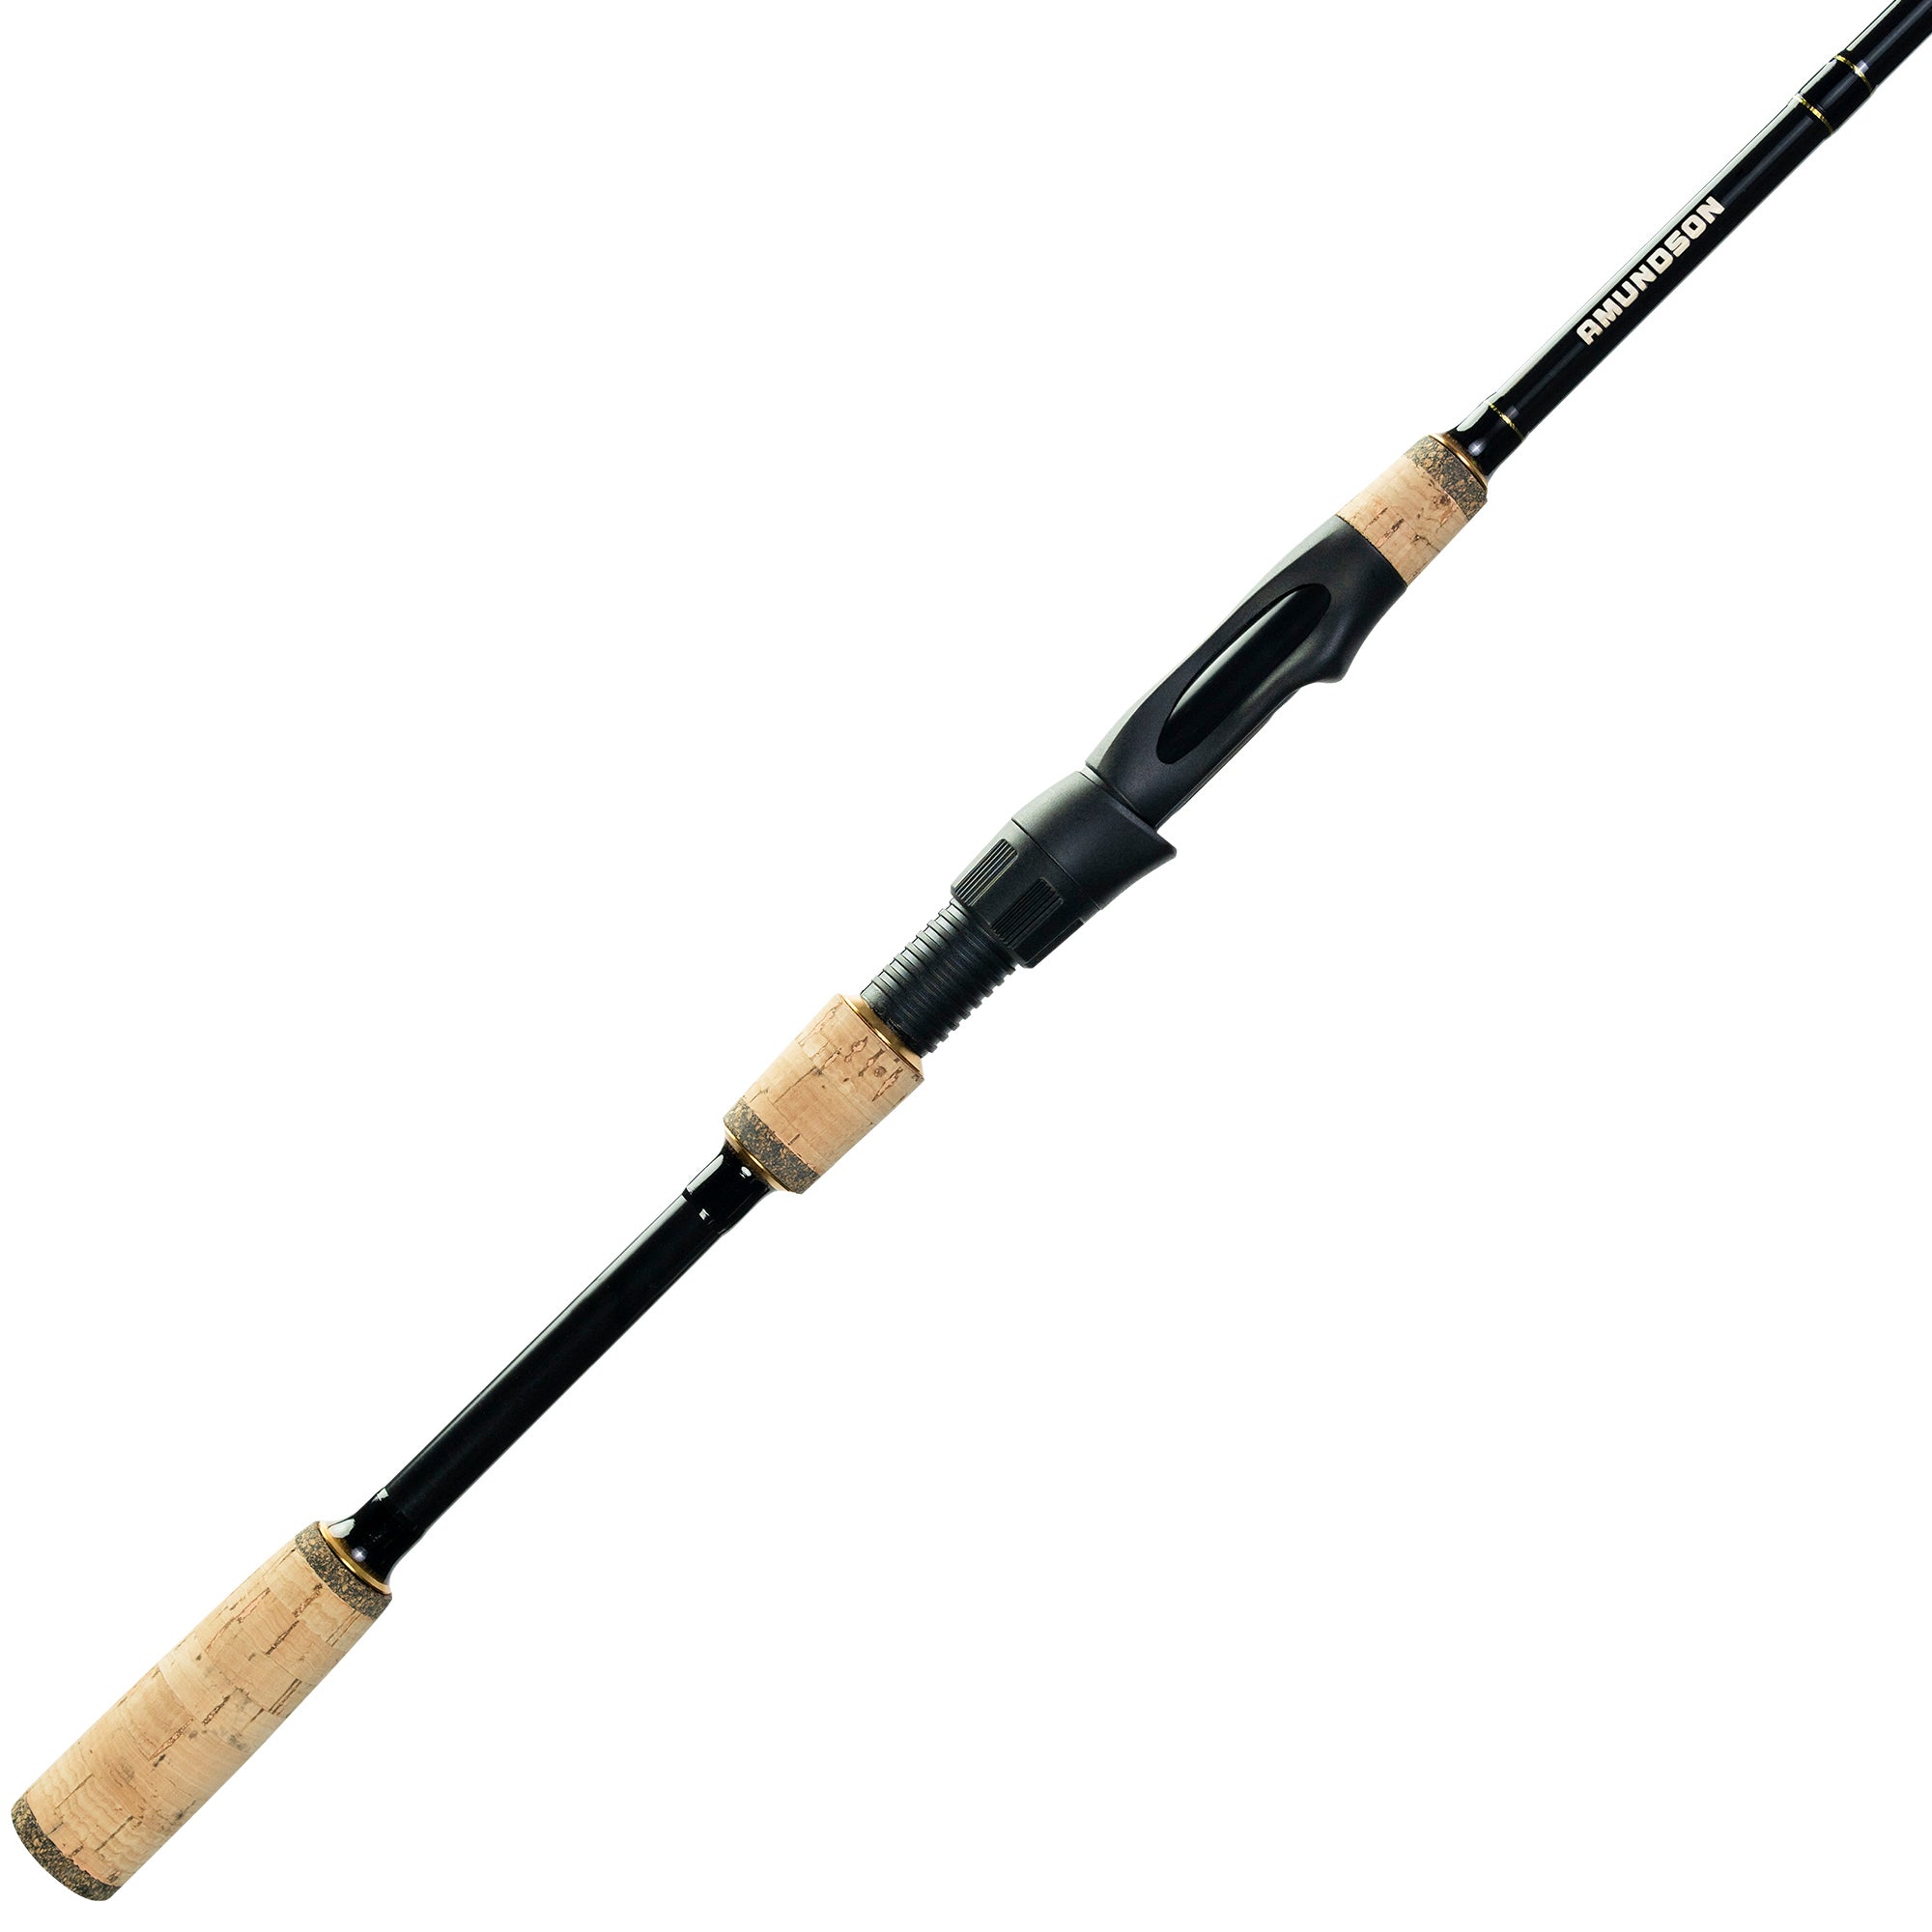 Spinning Fishing Rod SouthBend Infinity 5'6médium And Reel Bass